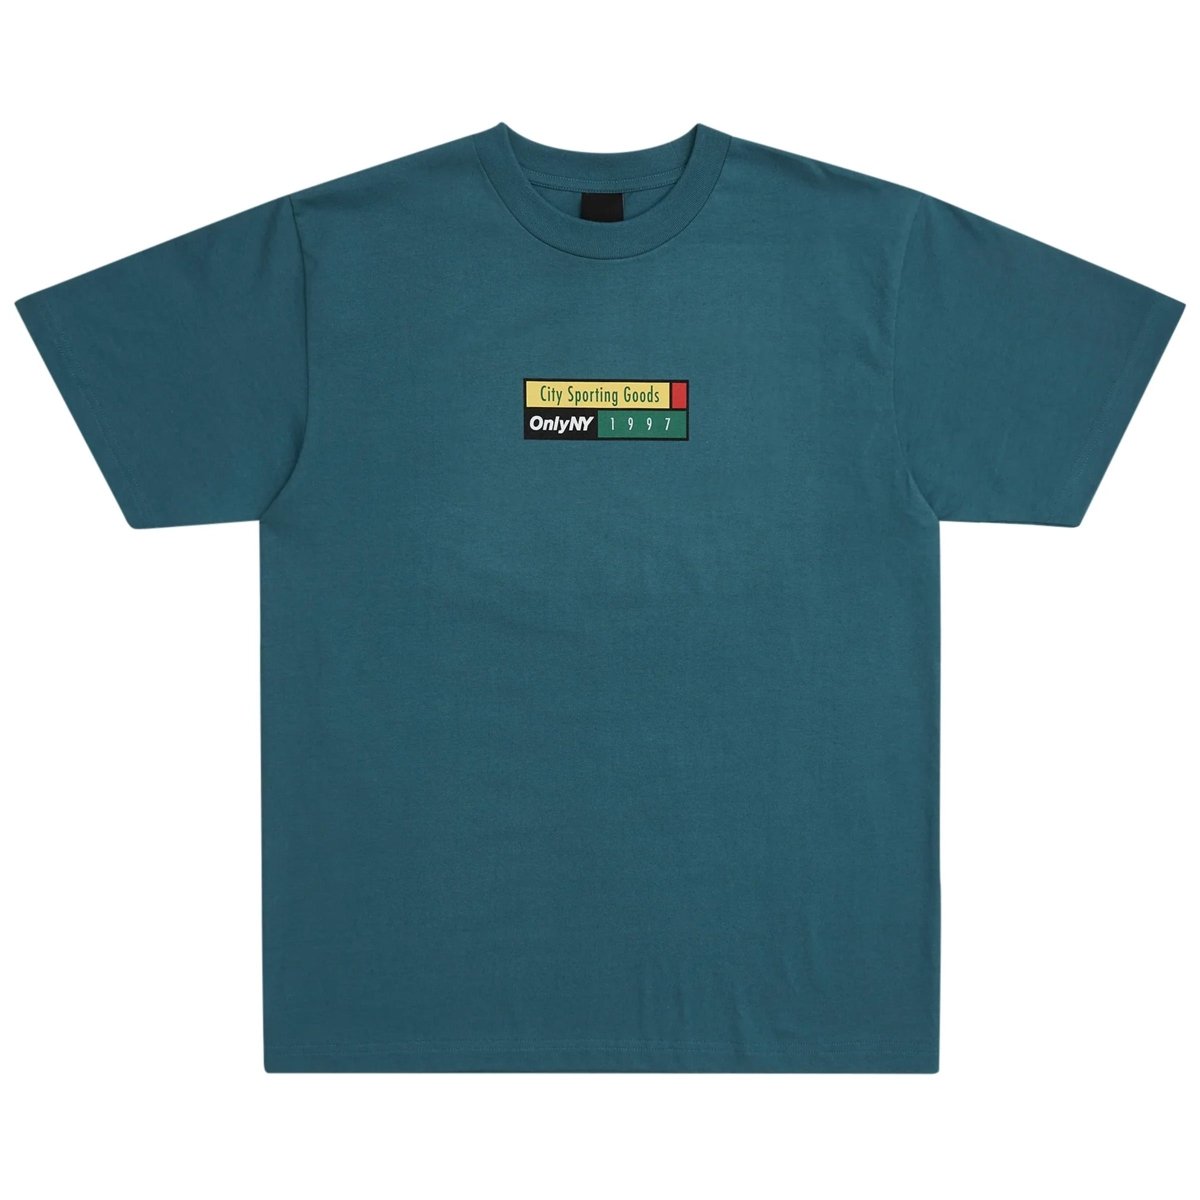 Only Ny City Sporting Goods Tee Shirt Teal - 10031872 - West NYC